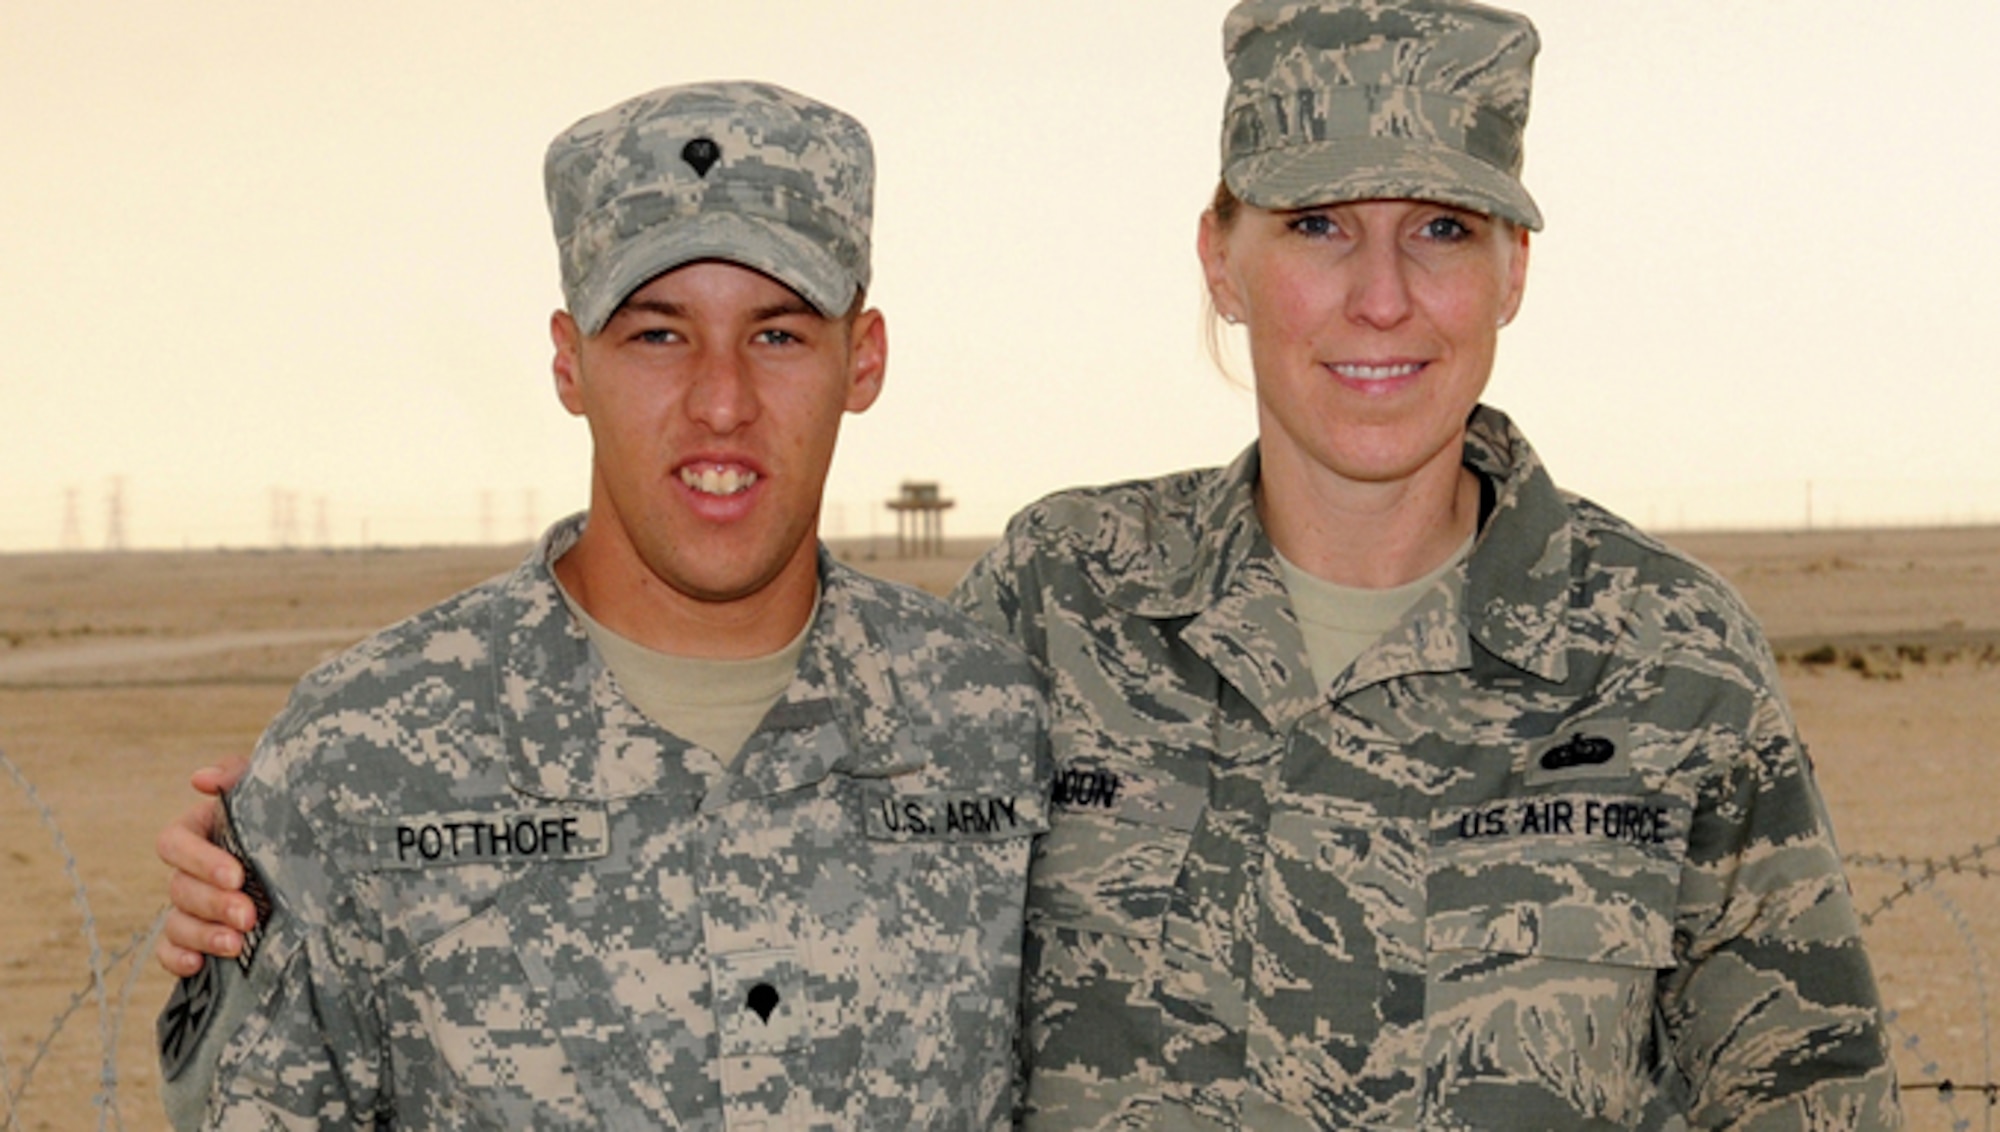 U.S. Air Force Master Sgt. Shanda Moon, executive assistant to the Command Chief, Air Force Central Command, and U.S. Army Spc. Alec Potthoff, 1st Battalion, 43rd Air Defense Artillery, 11th Air Defense Artillery Brigade wheeled vehicle mechanic, pose for a photo while deployed at an undisclosed location in Southwest Asia, here. Moon and her nephew, Potthoff, recently had an unexpected reunion in the dining facility after more than five years without seeing each other due to their separate military obligations. Moon, deployed from Cannon AFB, N.M., and Potthoff, deployed from Fort Bliss, Texas are both natives of Durango, Colo. (U.S. Air Force photo/Staff Sgt. Benjamin Mota)